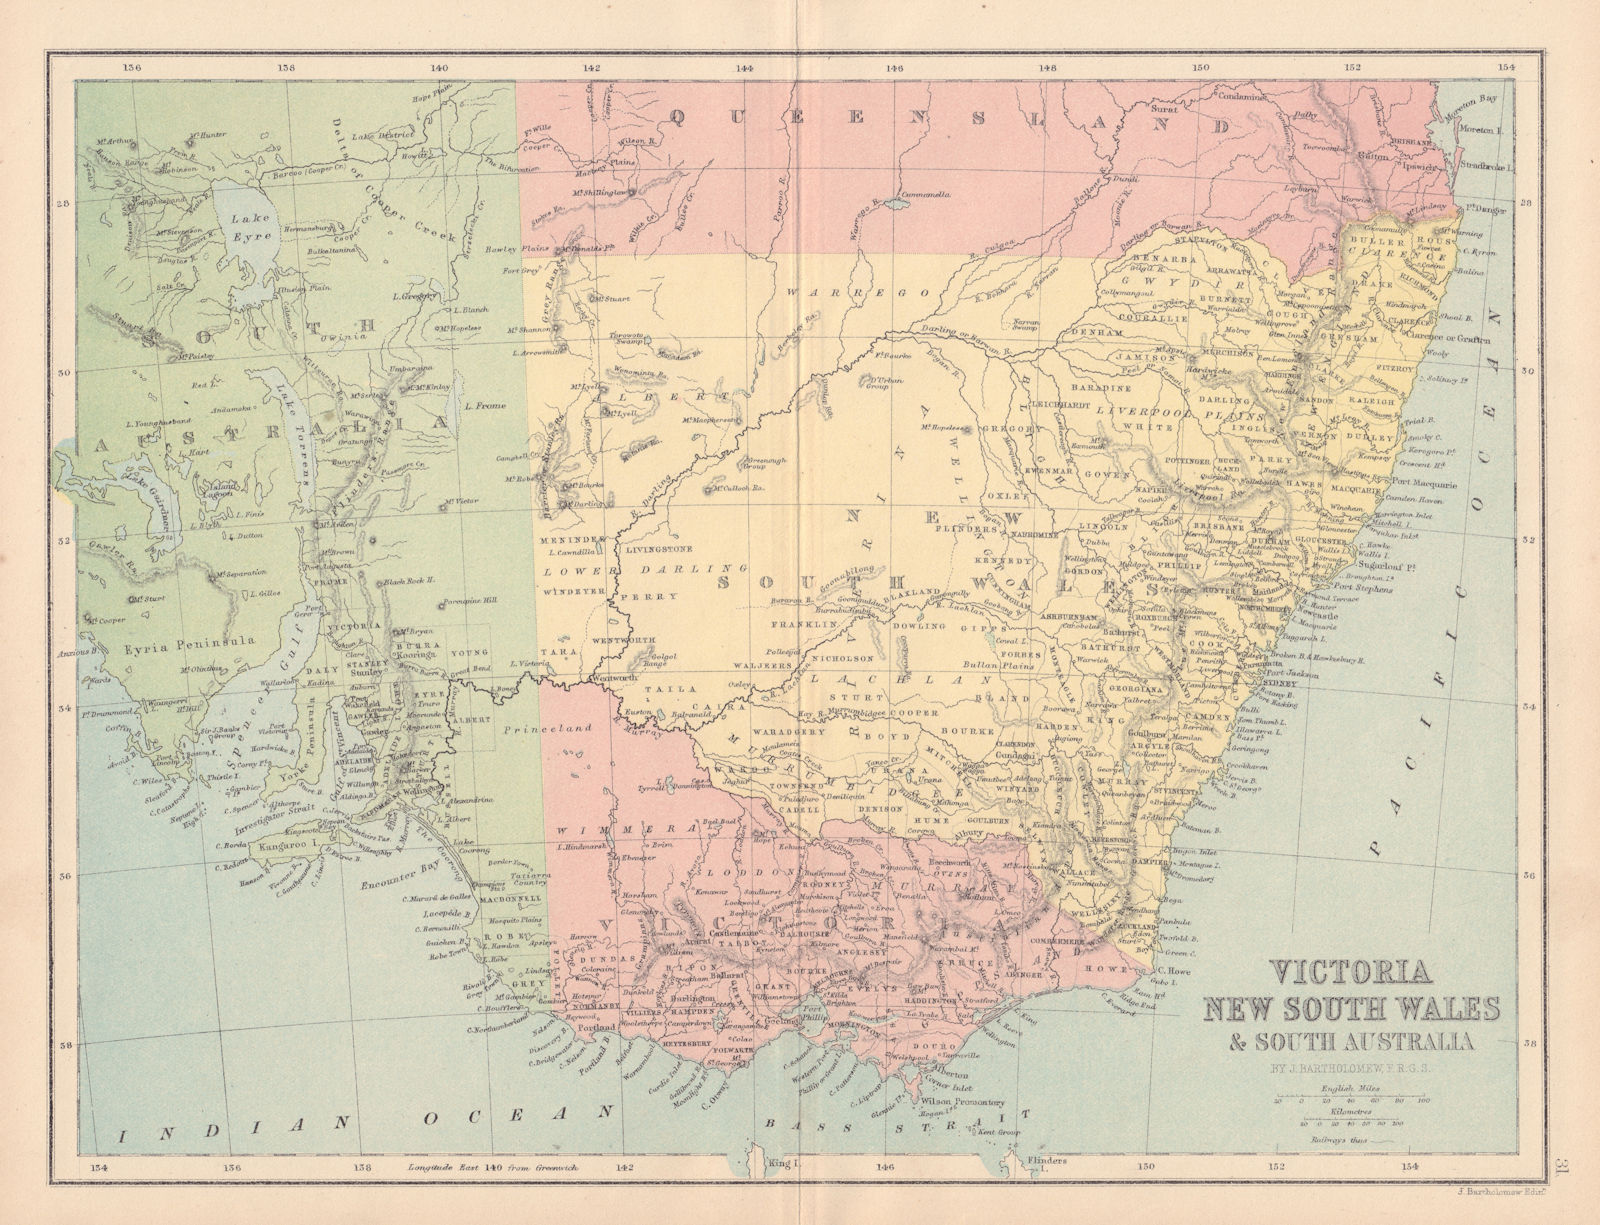 Victoria, New South Wales & South Australia. COLLINS 1873 old antique map